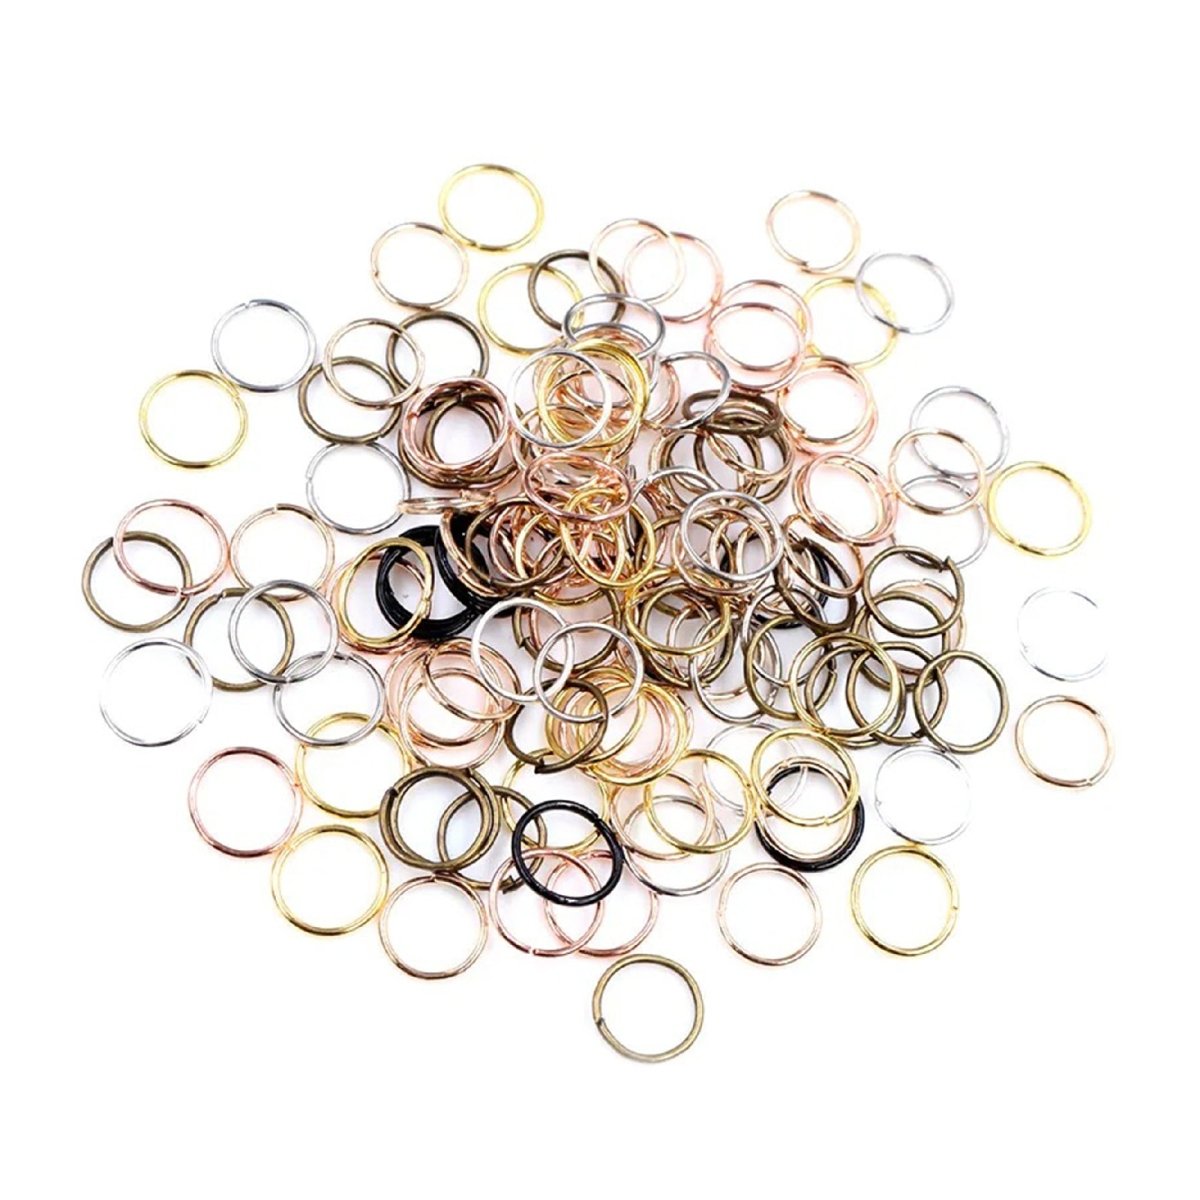 200pcs Open Jump Rings 8mm 10mm 12mm Single Loop Rhodium Light Silver Gold KC Gold Keyrings Small - 8mm Mixed - - Asia Sell